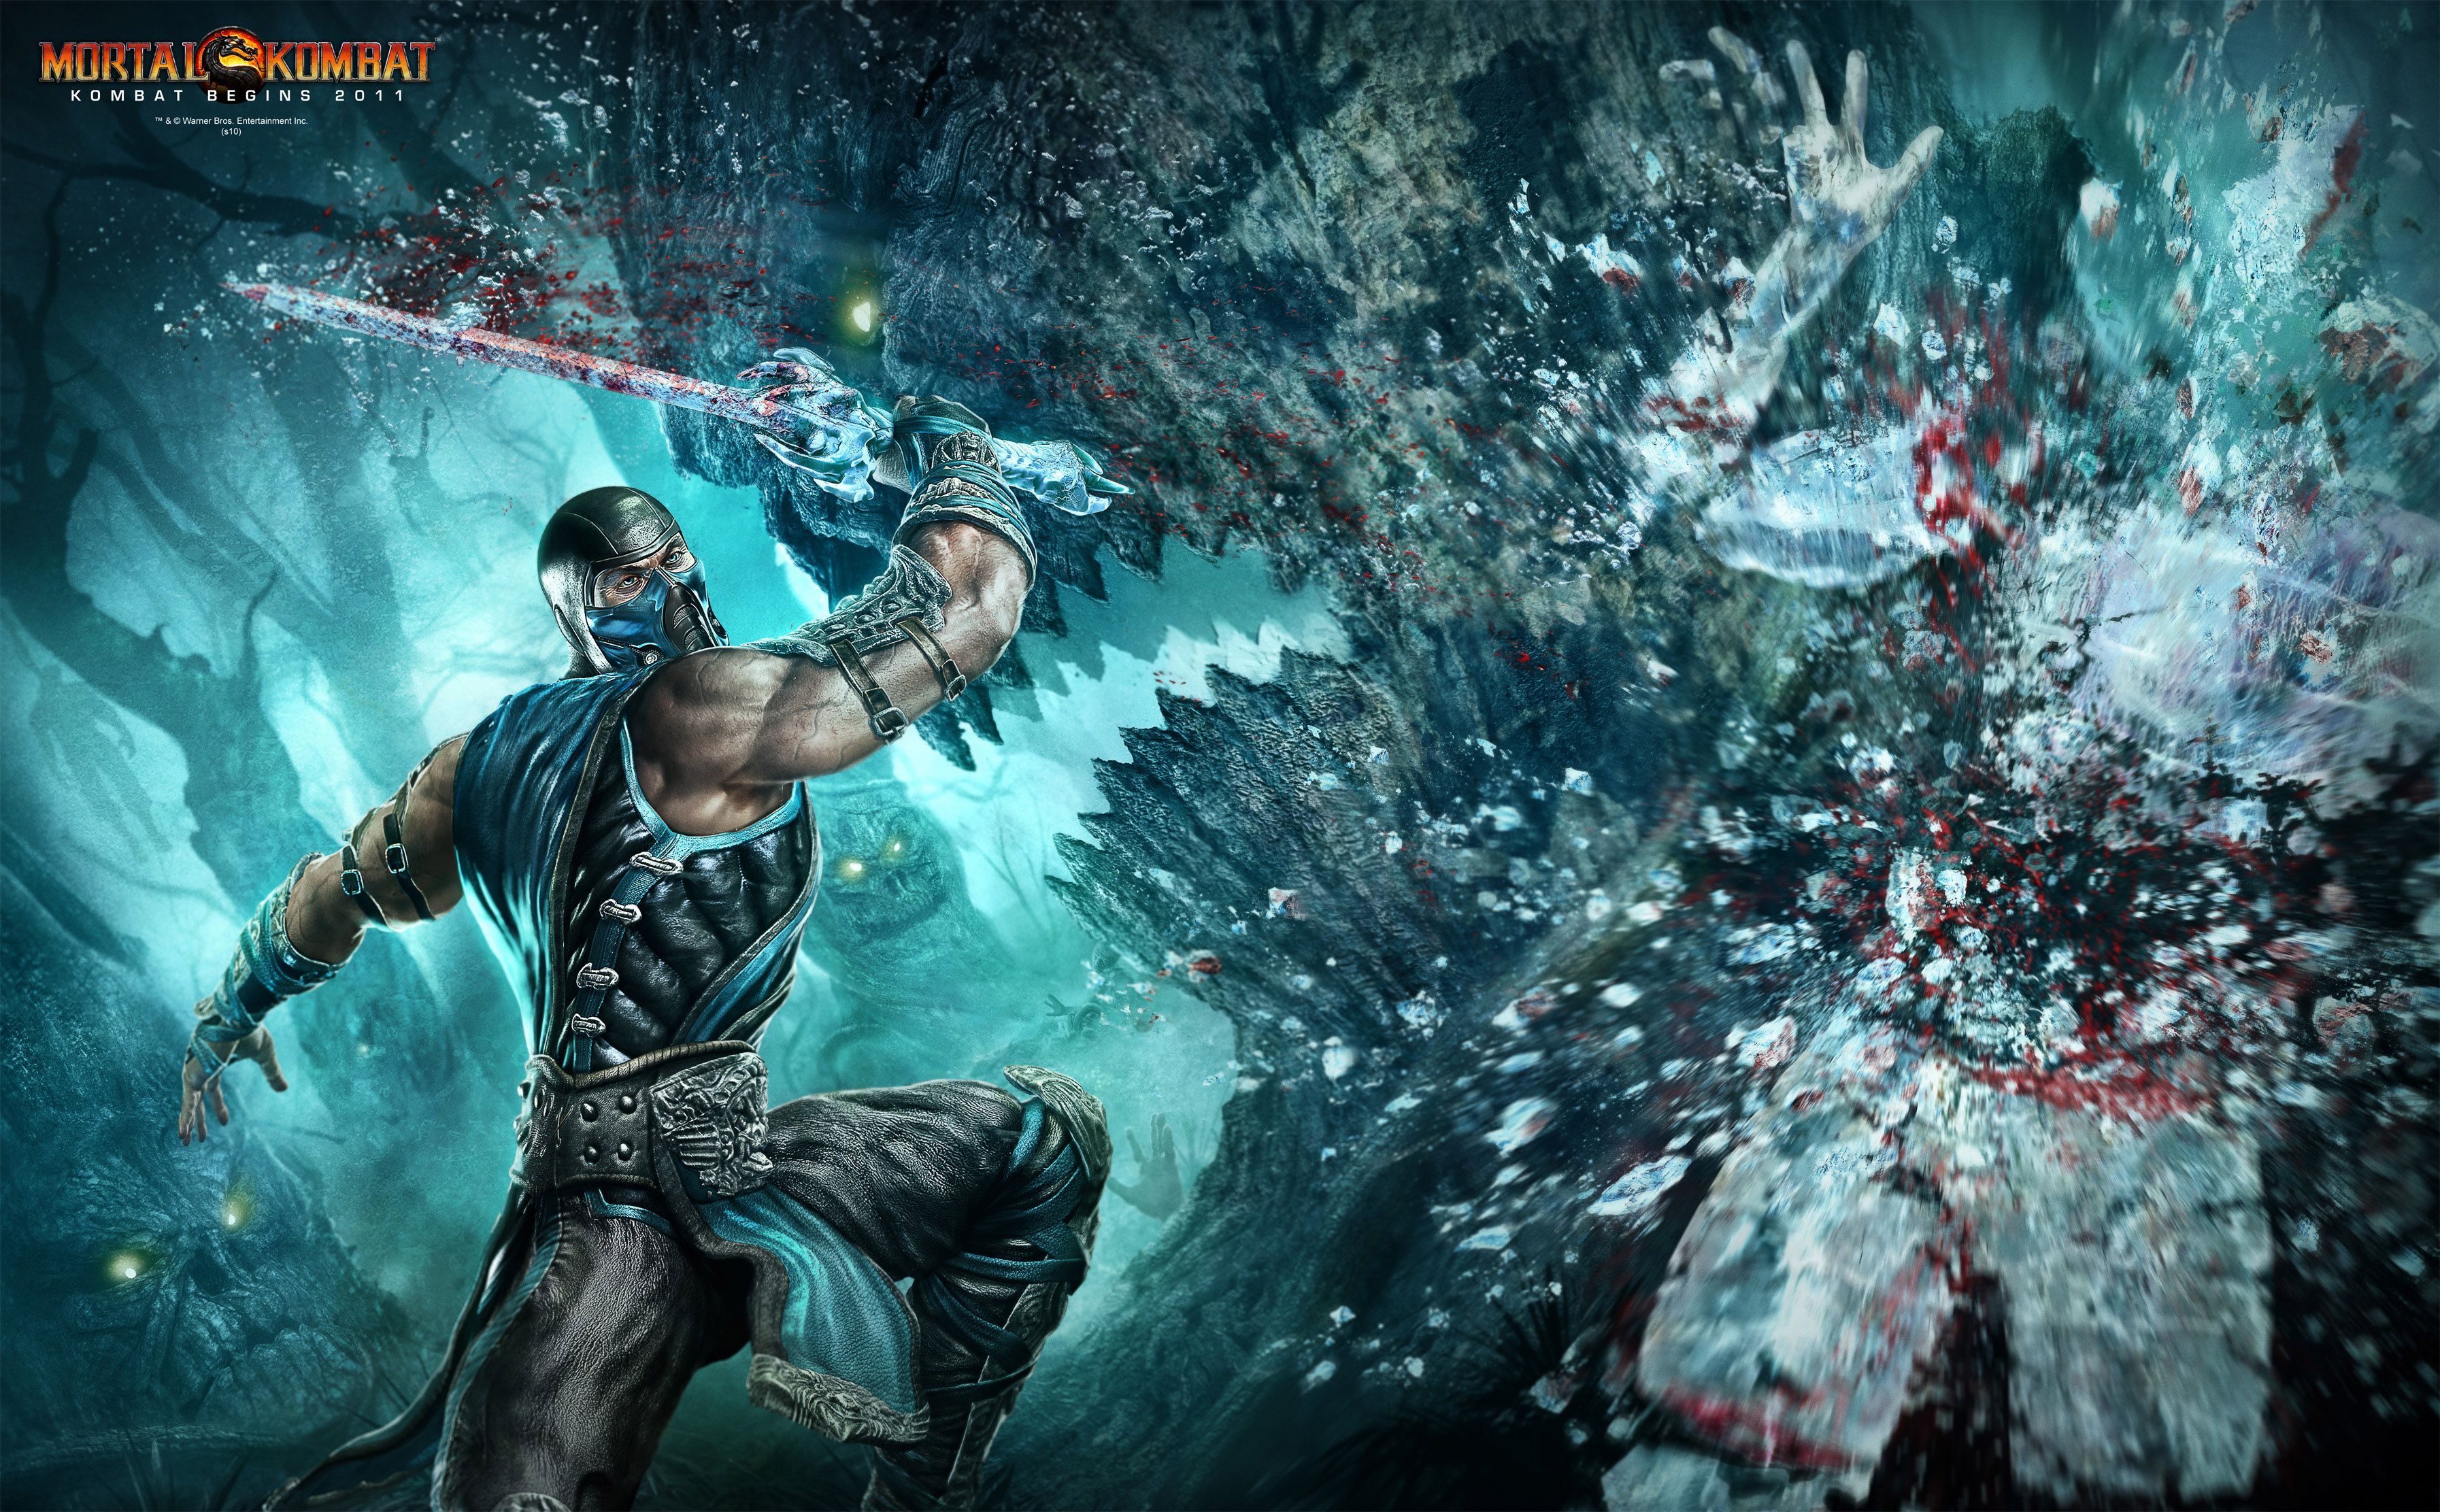 Sub Zero screenshots, images and pictures - Giant Bomb